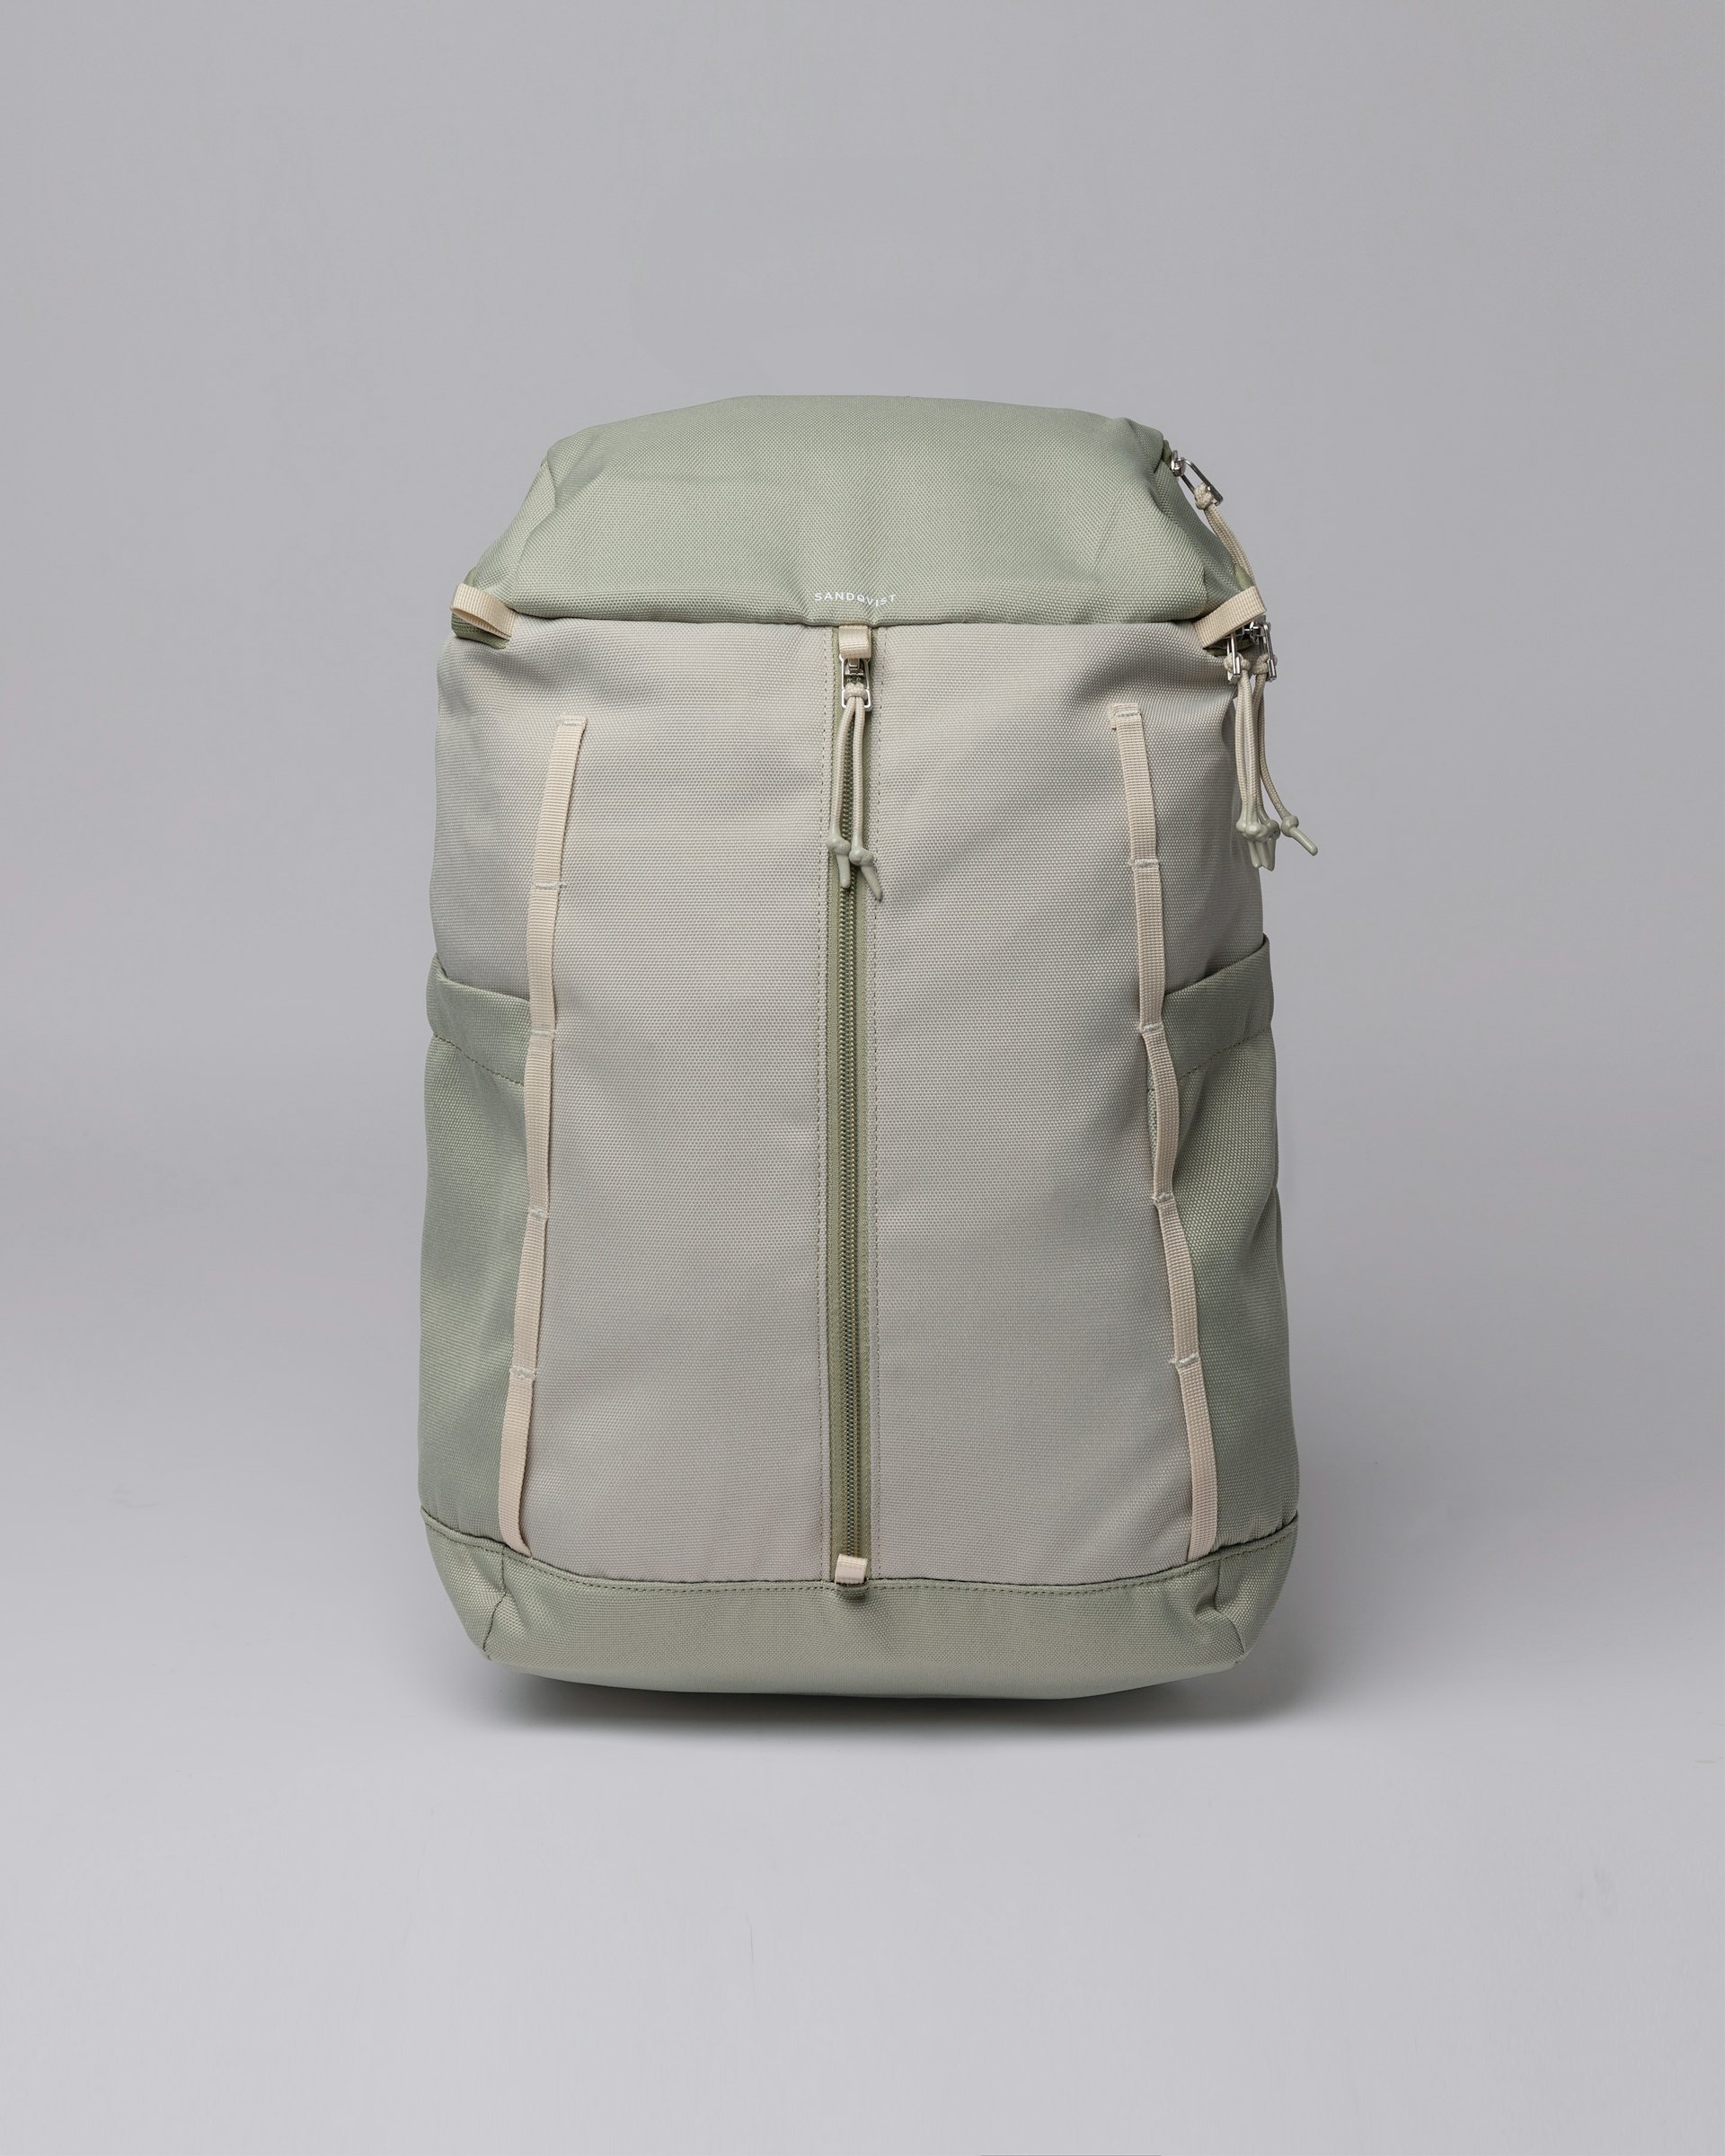 Sune belongs to the category Backpacks and is in color pale birch light & pale birch dark (1 of 7)